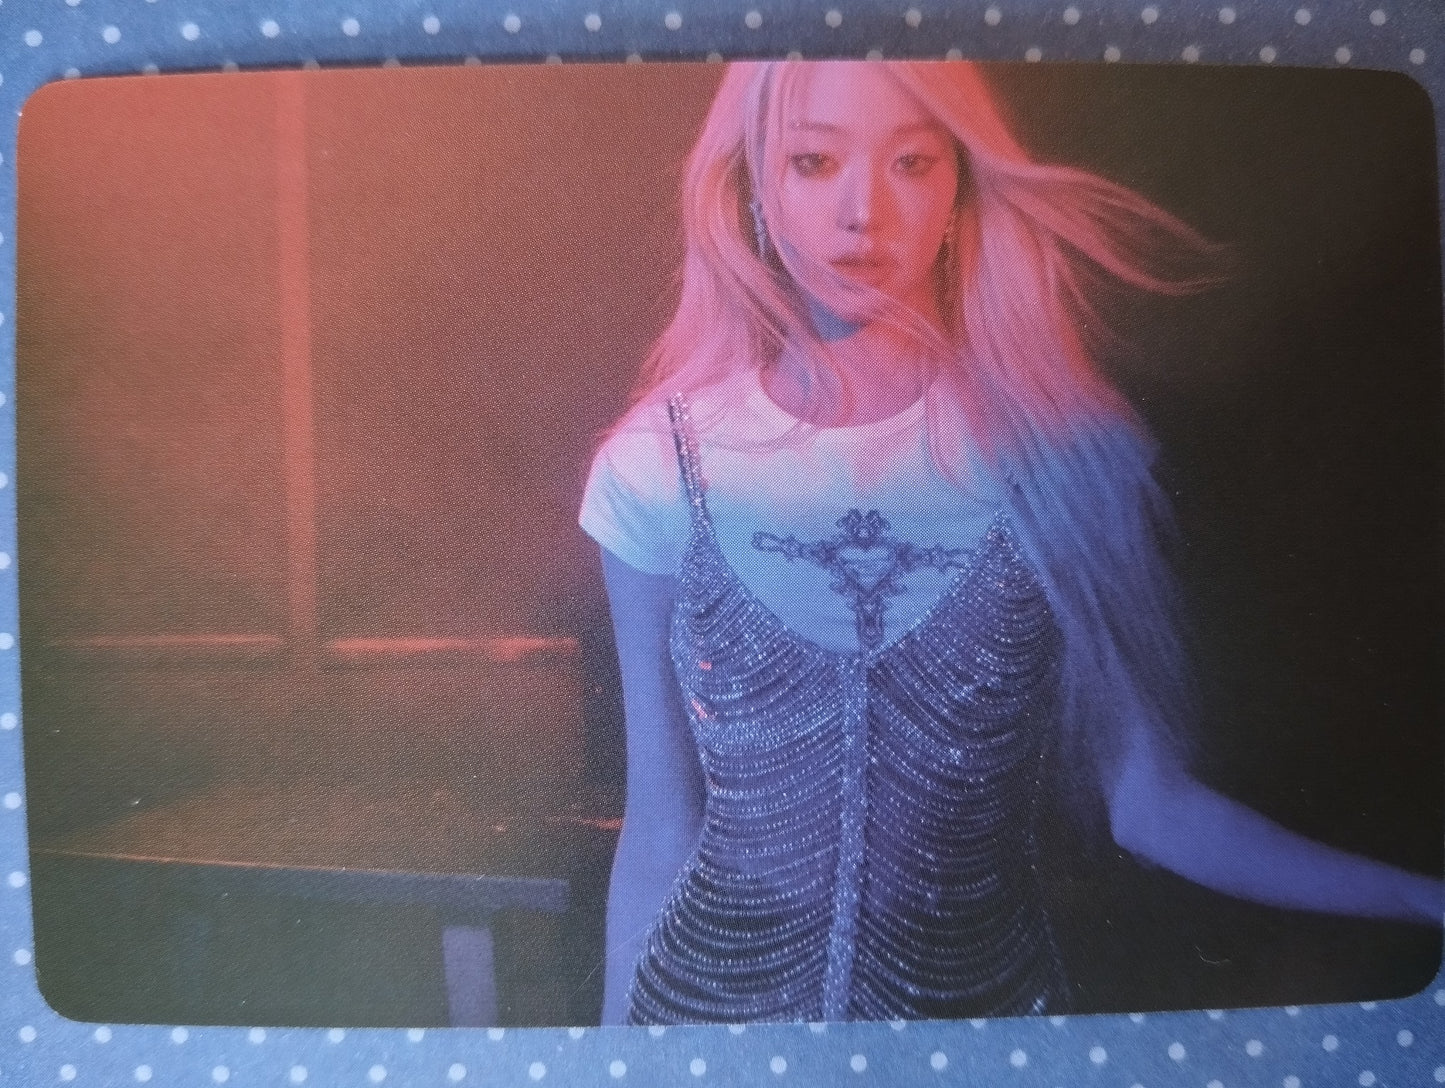 Photocard IVE The first Ep. Wonyoung